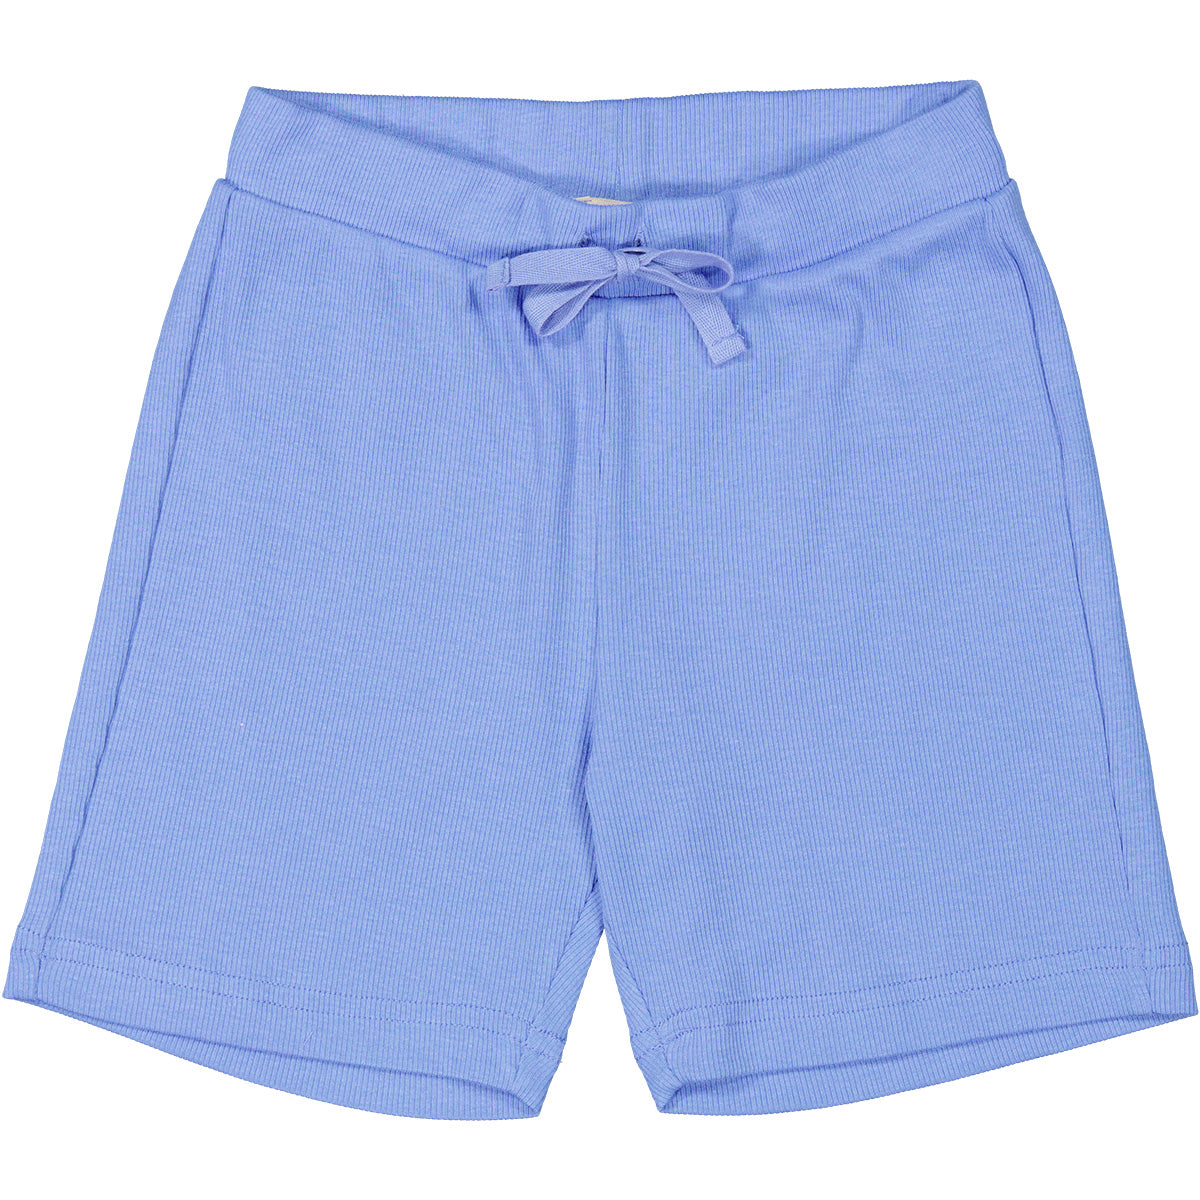 The Paulo Shorts from MarMar Copenhagen. Shorts with a wide elastic waistband, ribbon and pocket on the back.